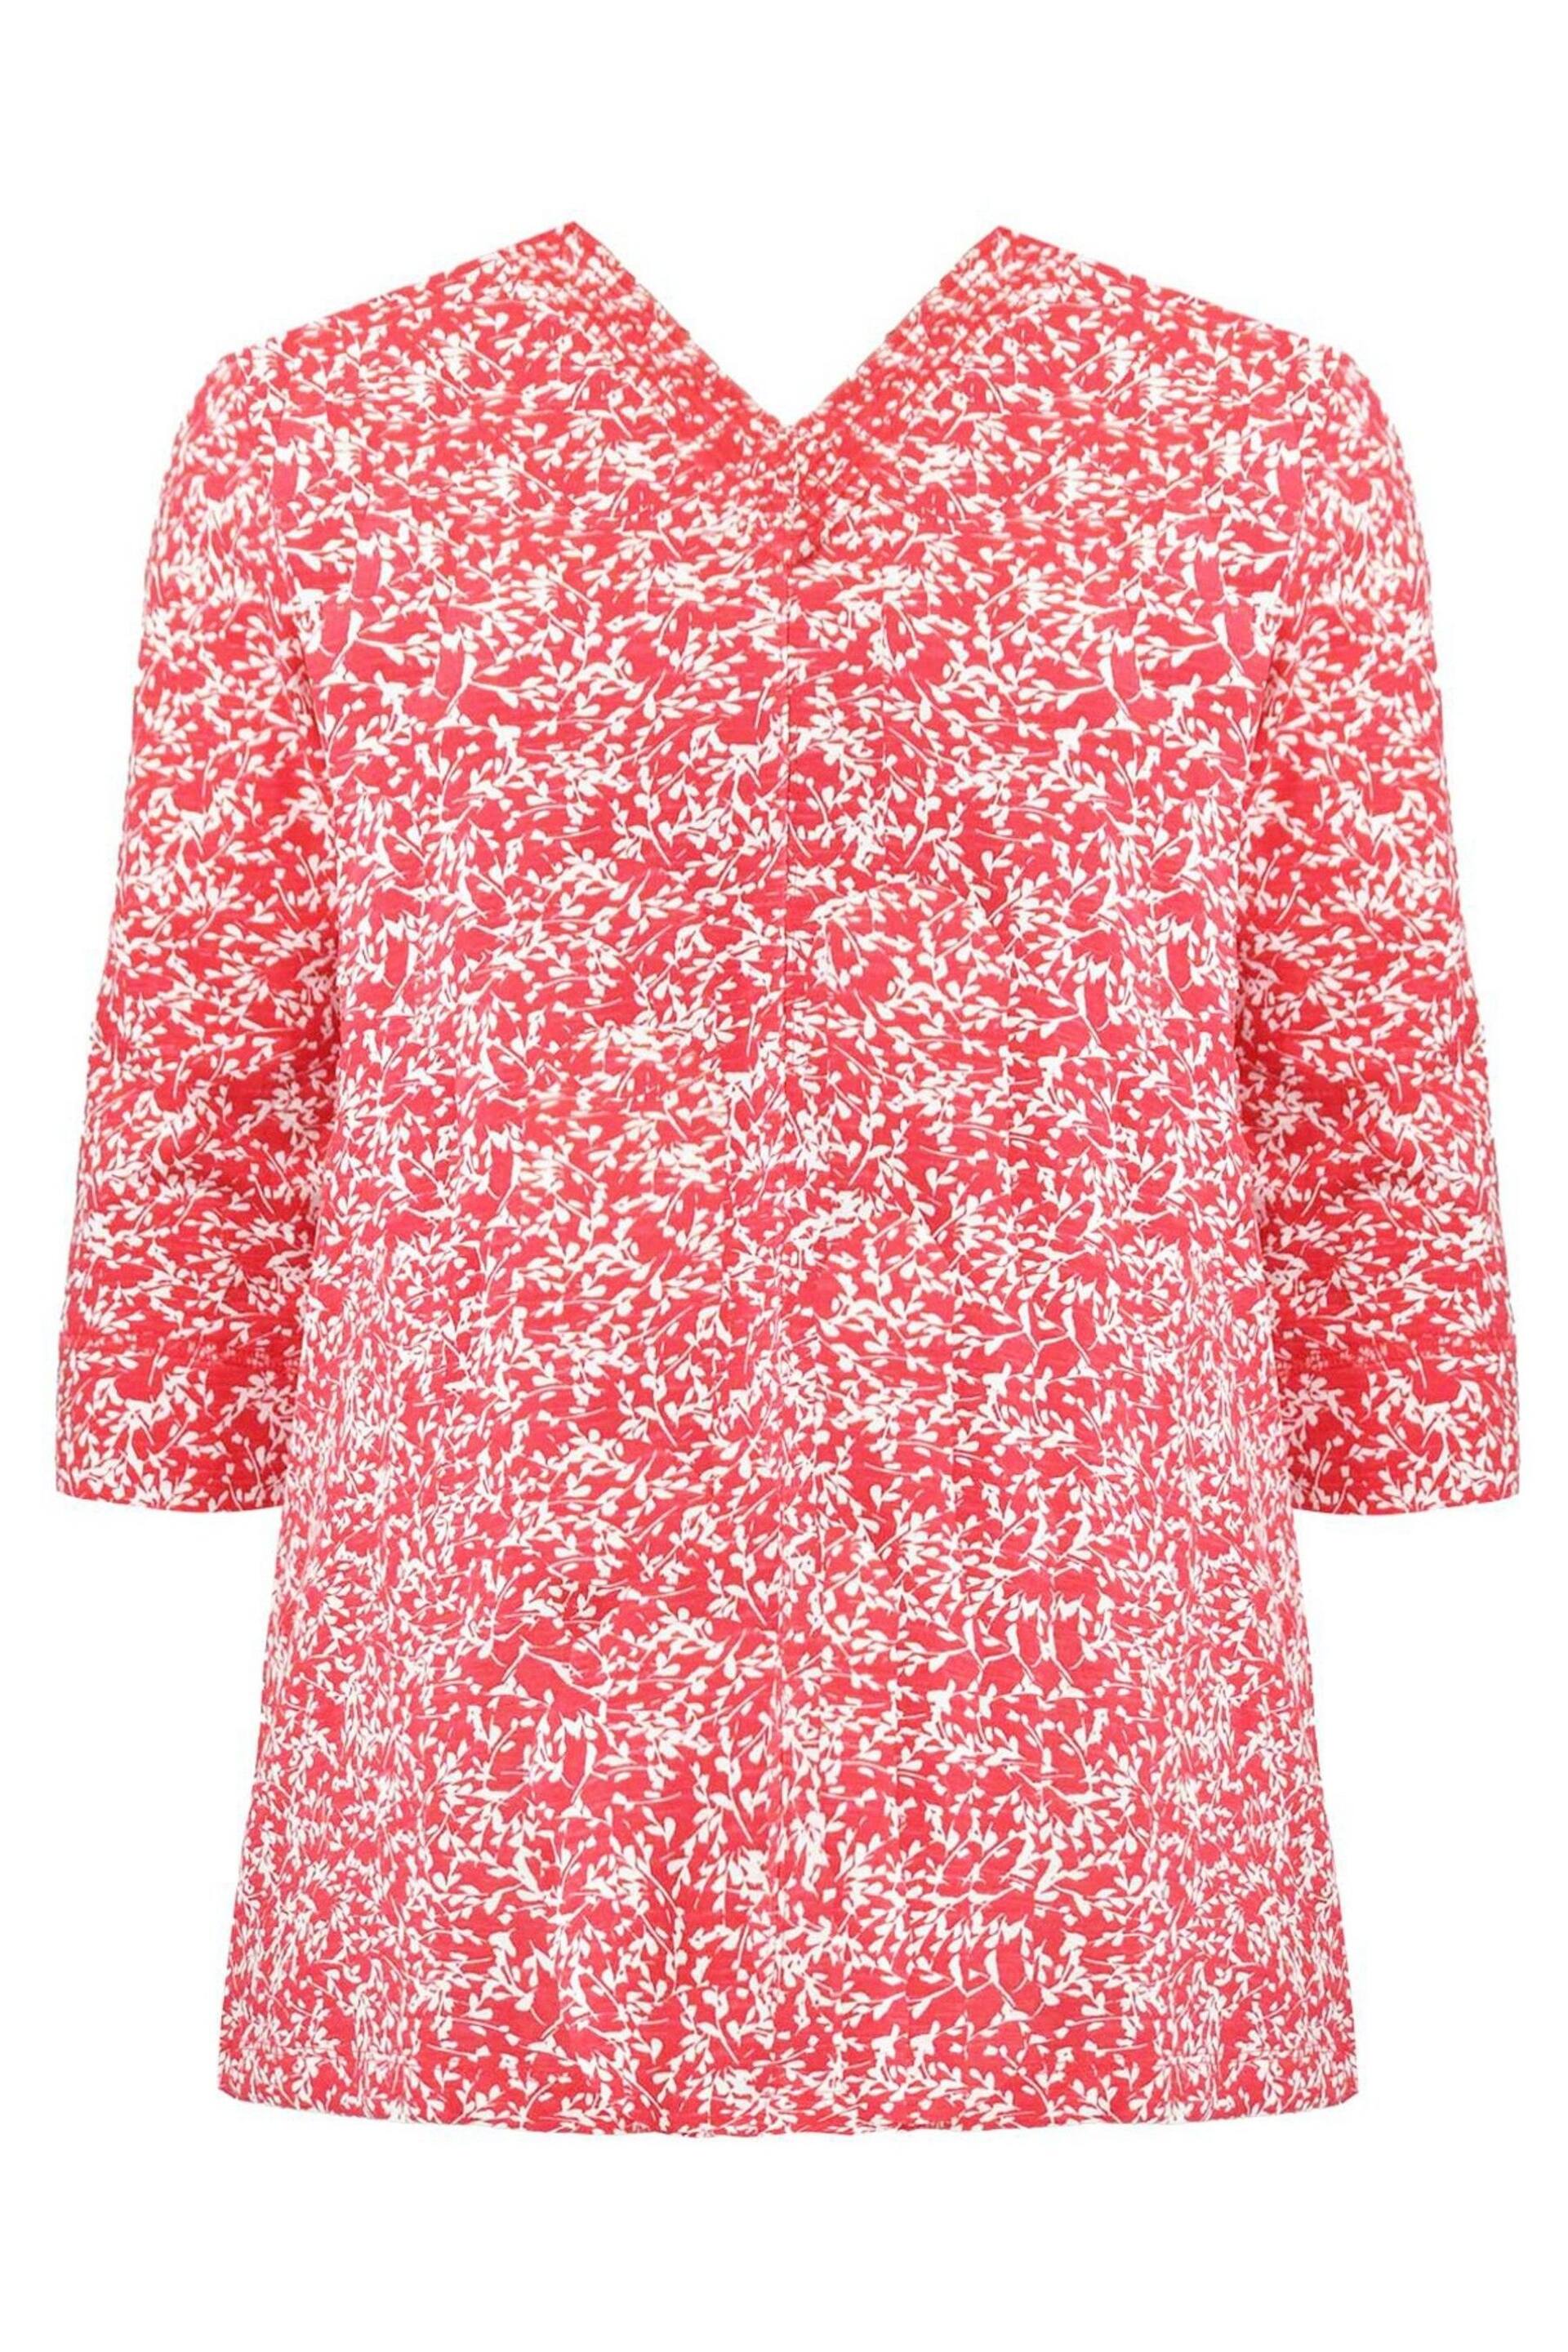 Live Unlimited Curve Red Sprig Print Cotton Slub Relaxed Tunic - Image 8 of 8